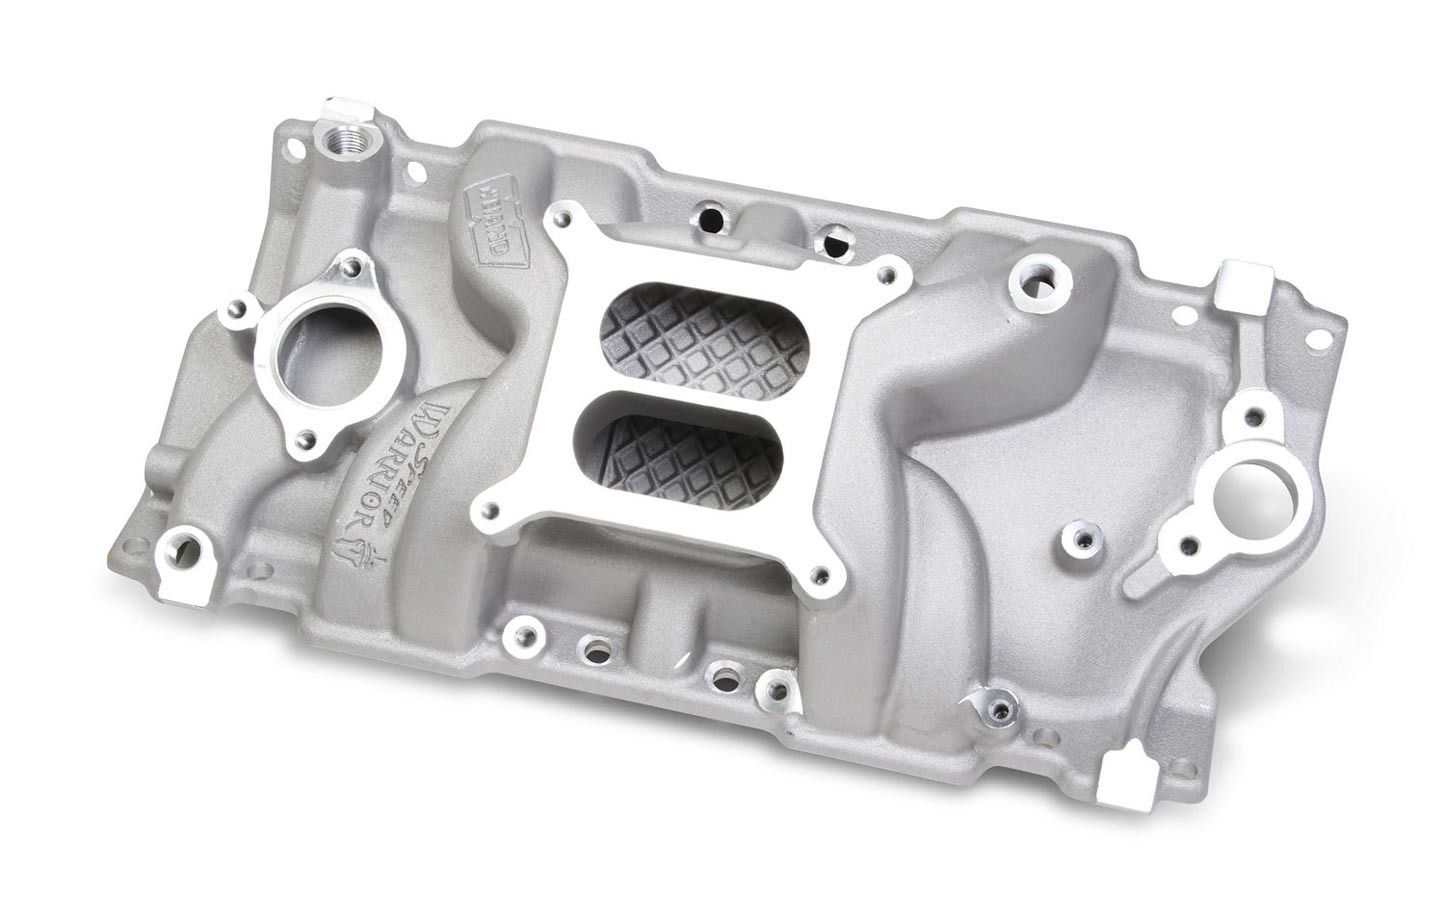 Weiand 8170 Intake Manifold, Street Warrior, Square Bore, Dual Plane, Aluminum, Natural, Small Block Chevy, Each